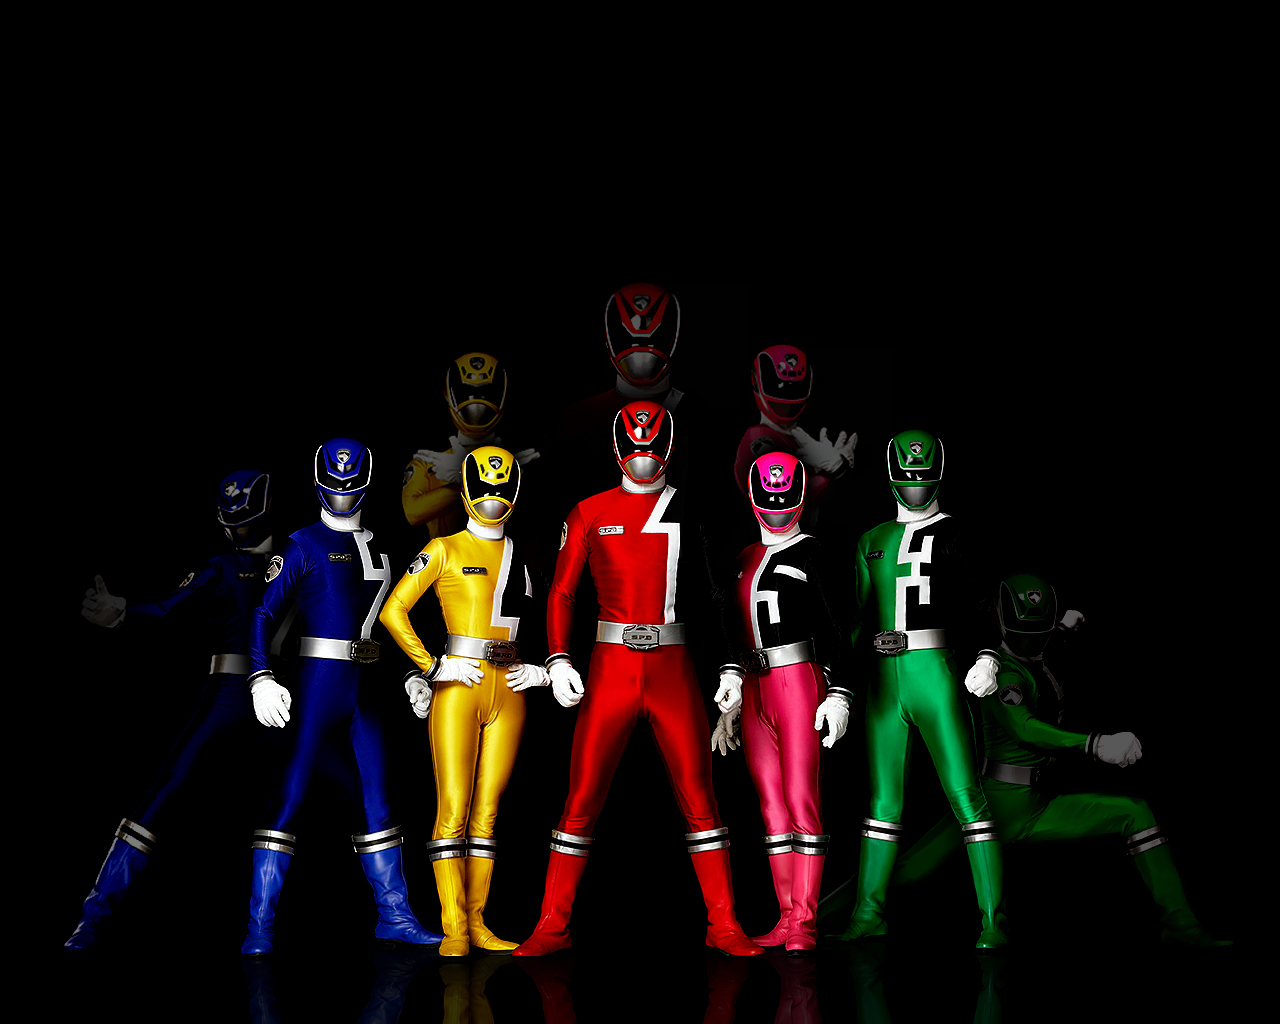 49 Power Rangers HD Wallpapers Backgrounds - Wallpaper Abyss